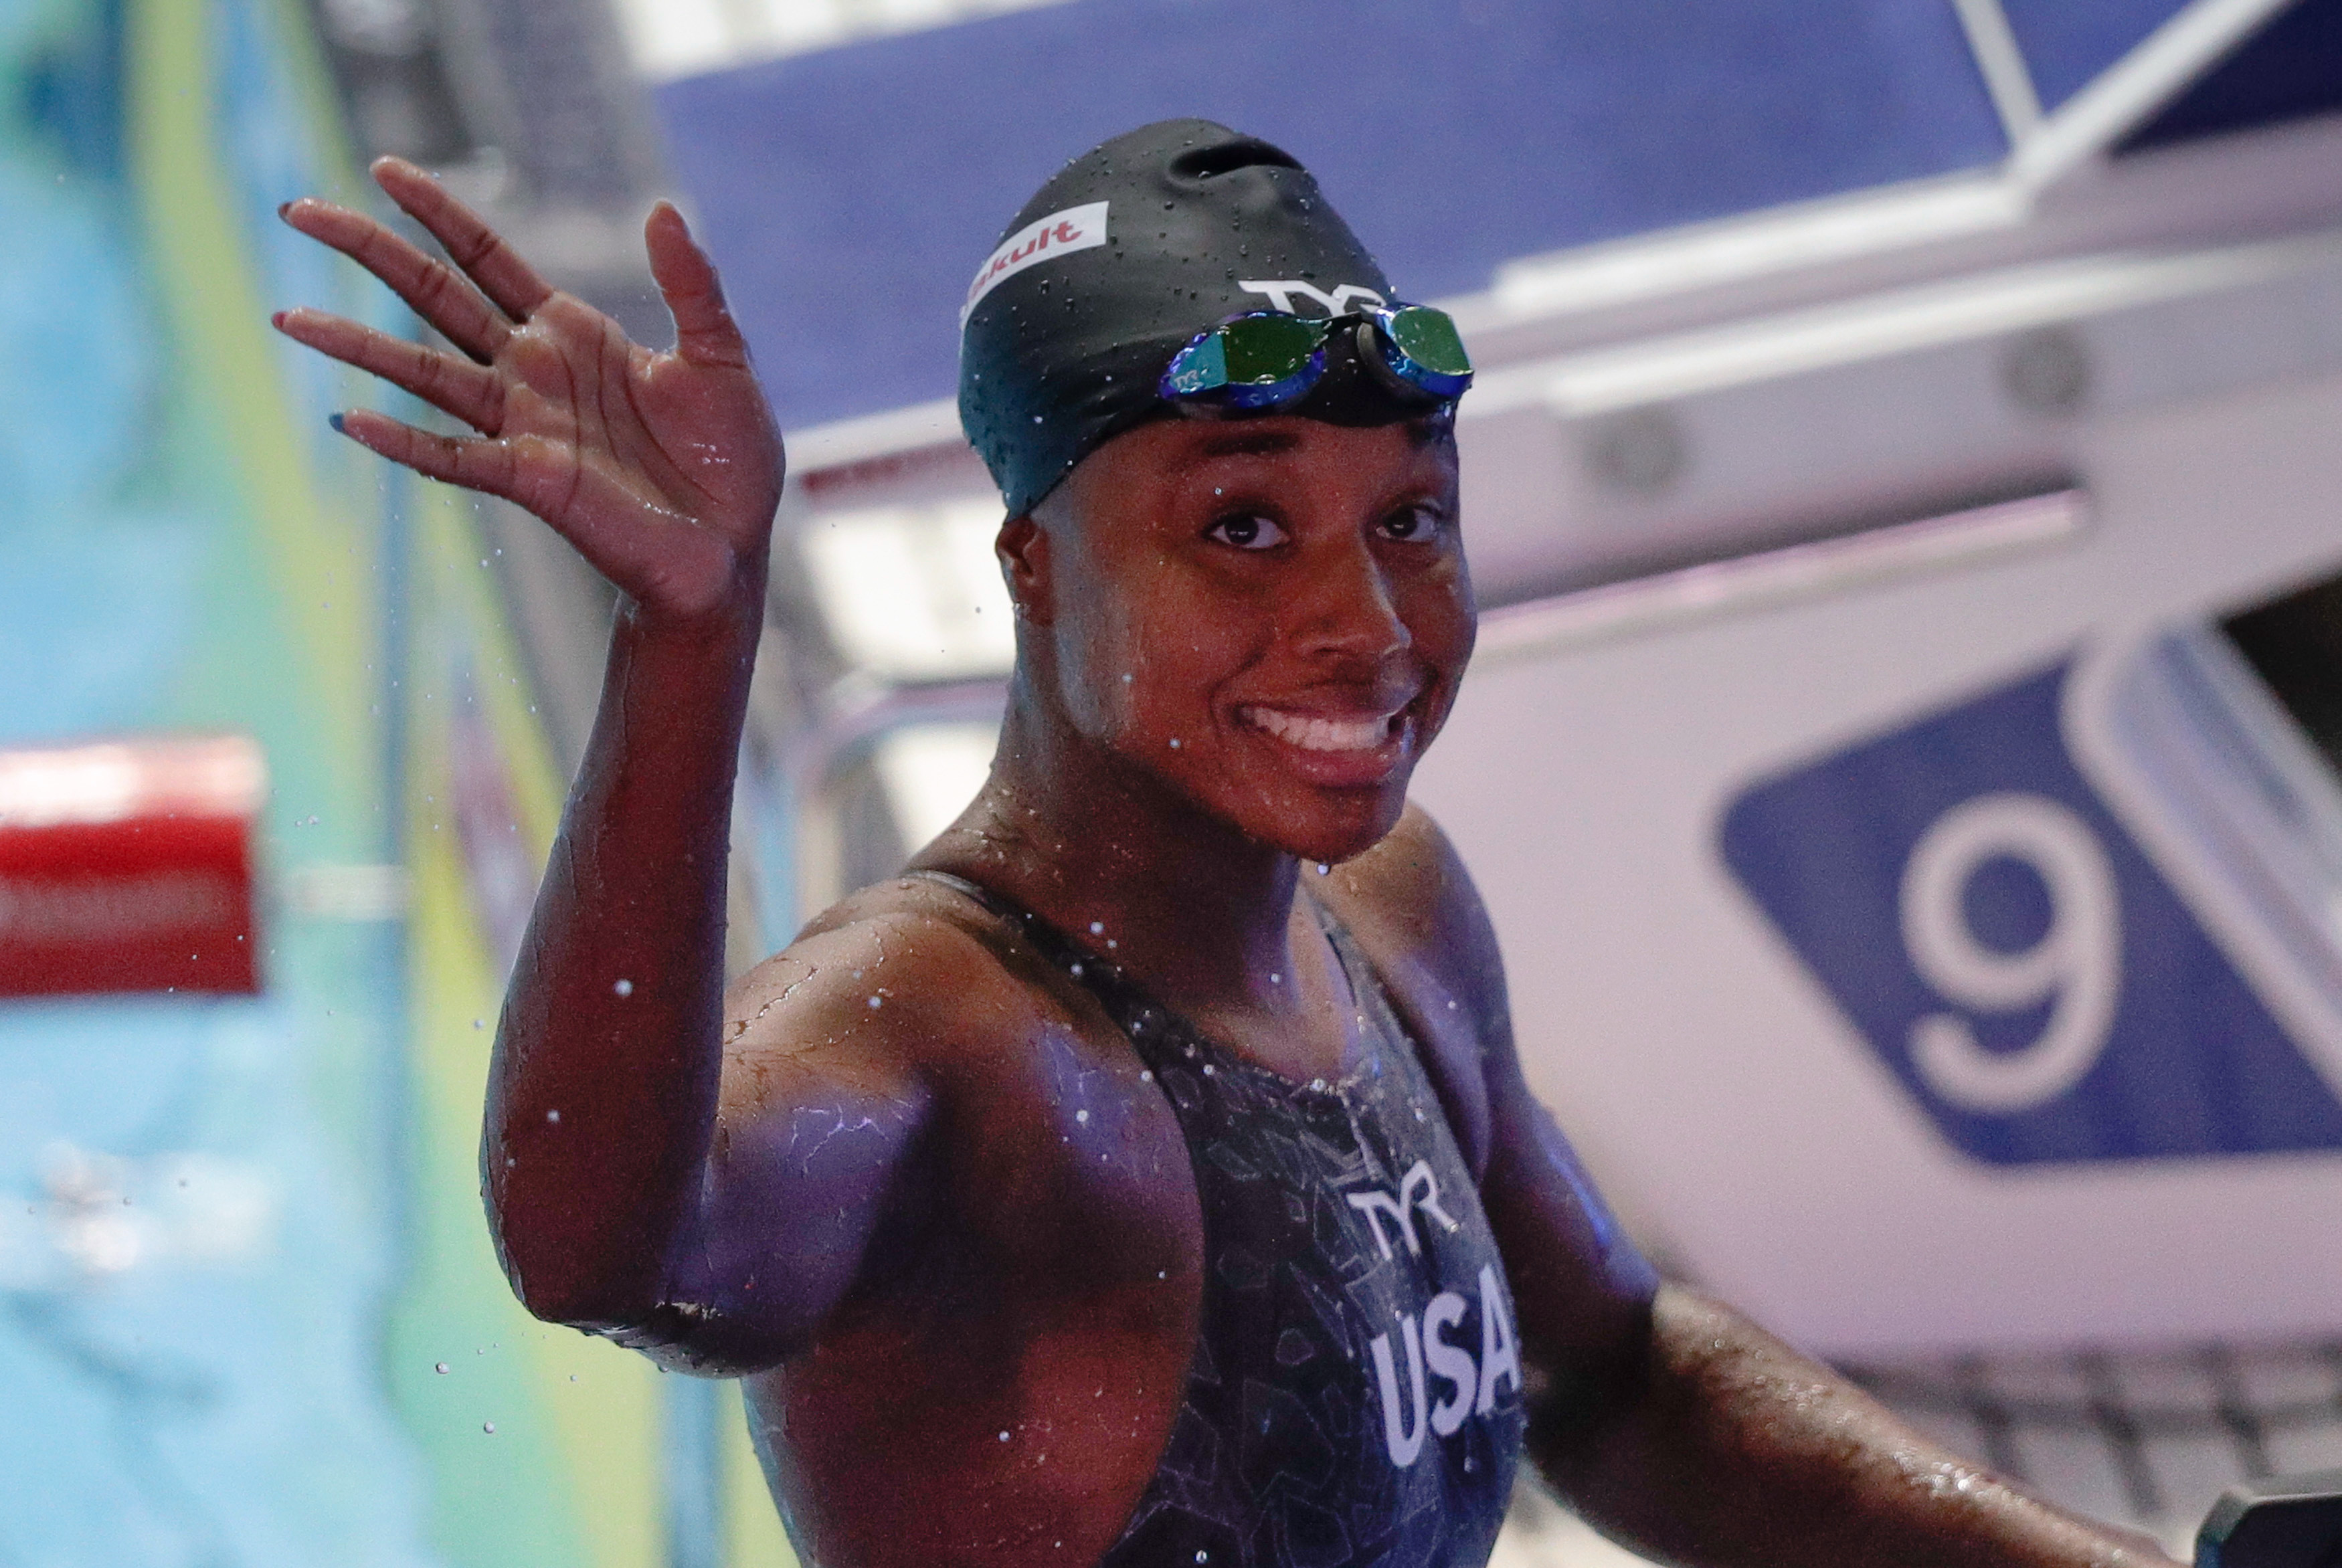 American swimmer Simone Manuel waves after winning the women's